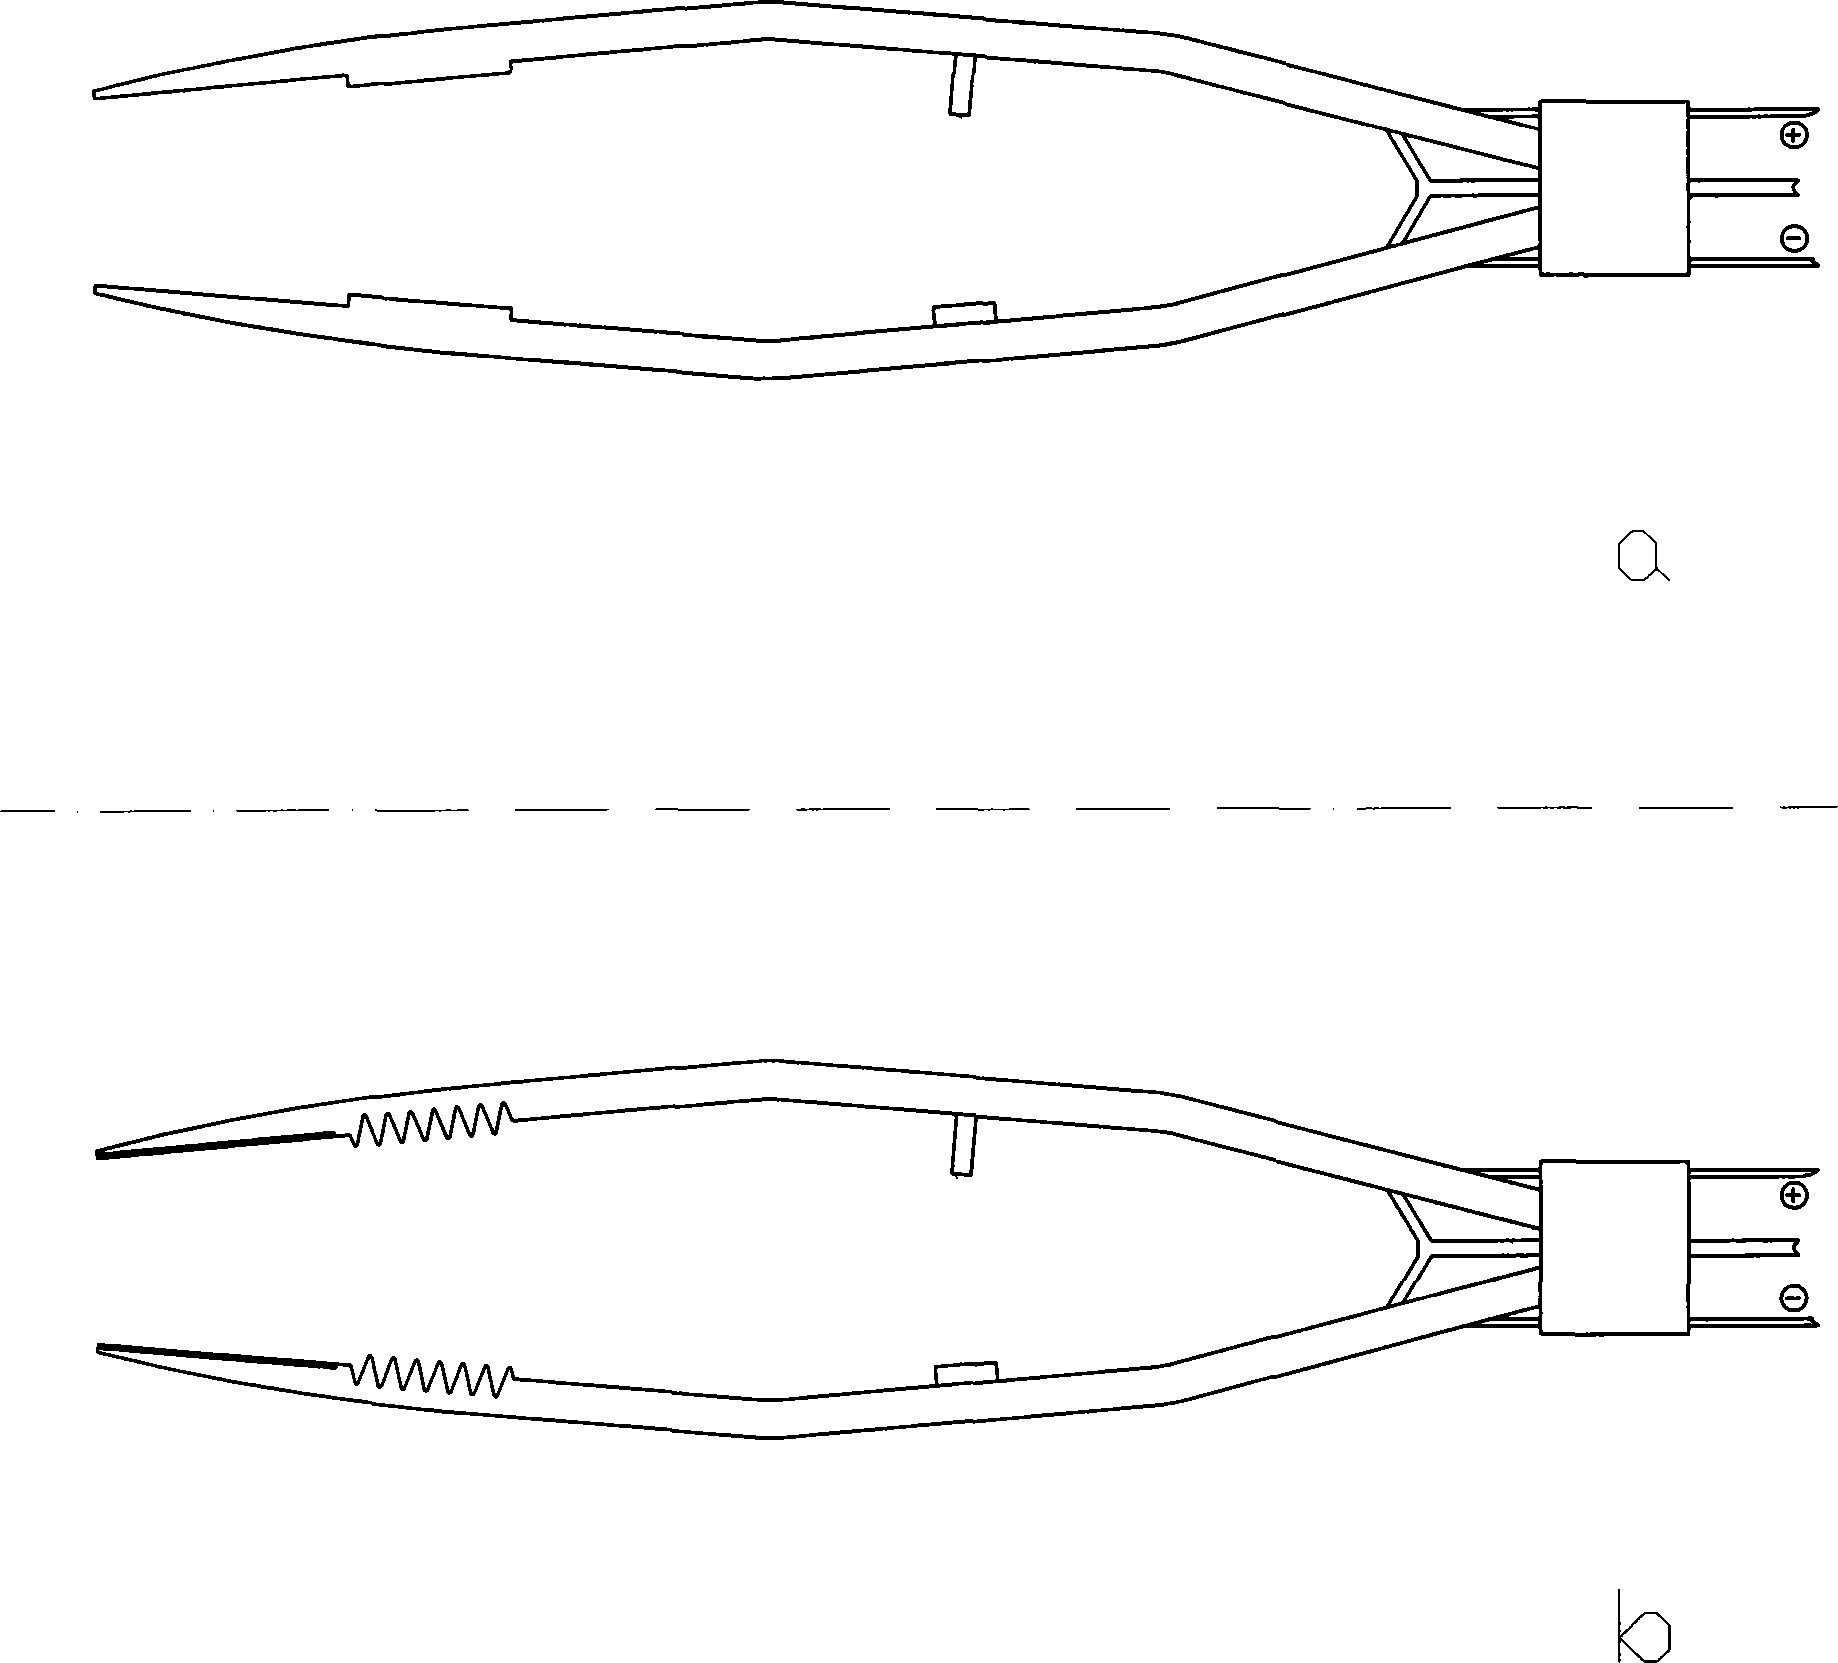 Toothed non-sticky bipolar electrocoagulation forceps